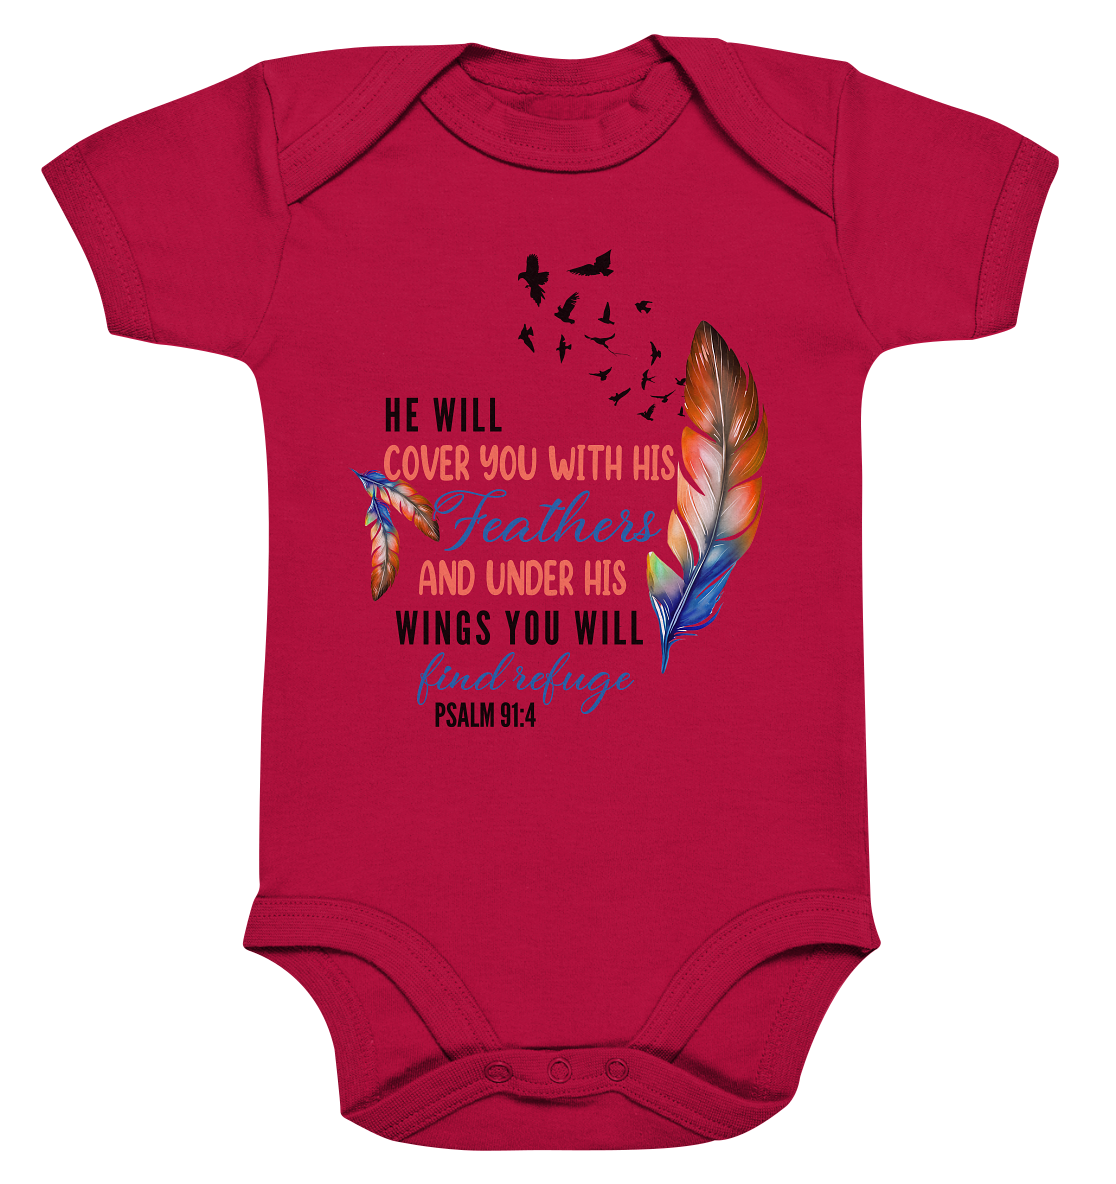 Psalm 91:4 - He will cover you with his Feathers - Organic Baby Bodysuite